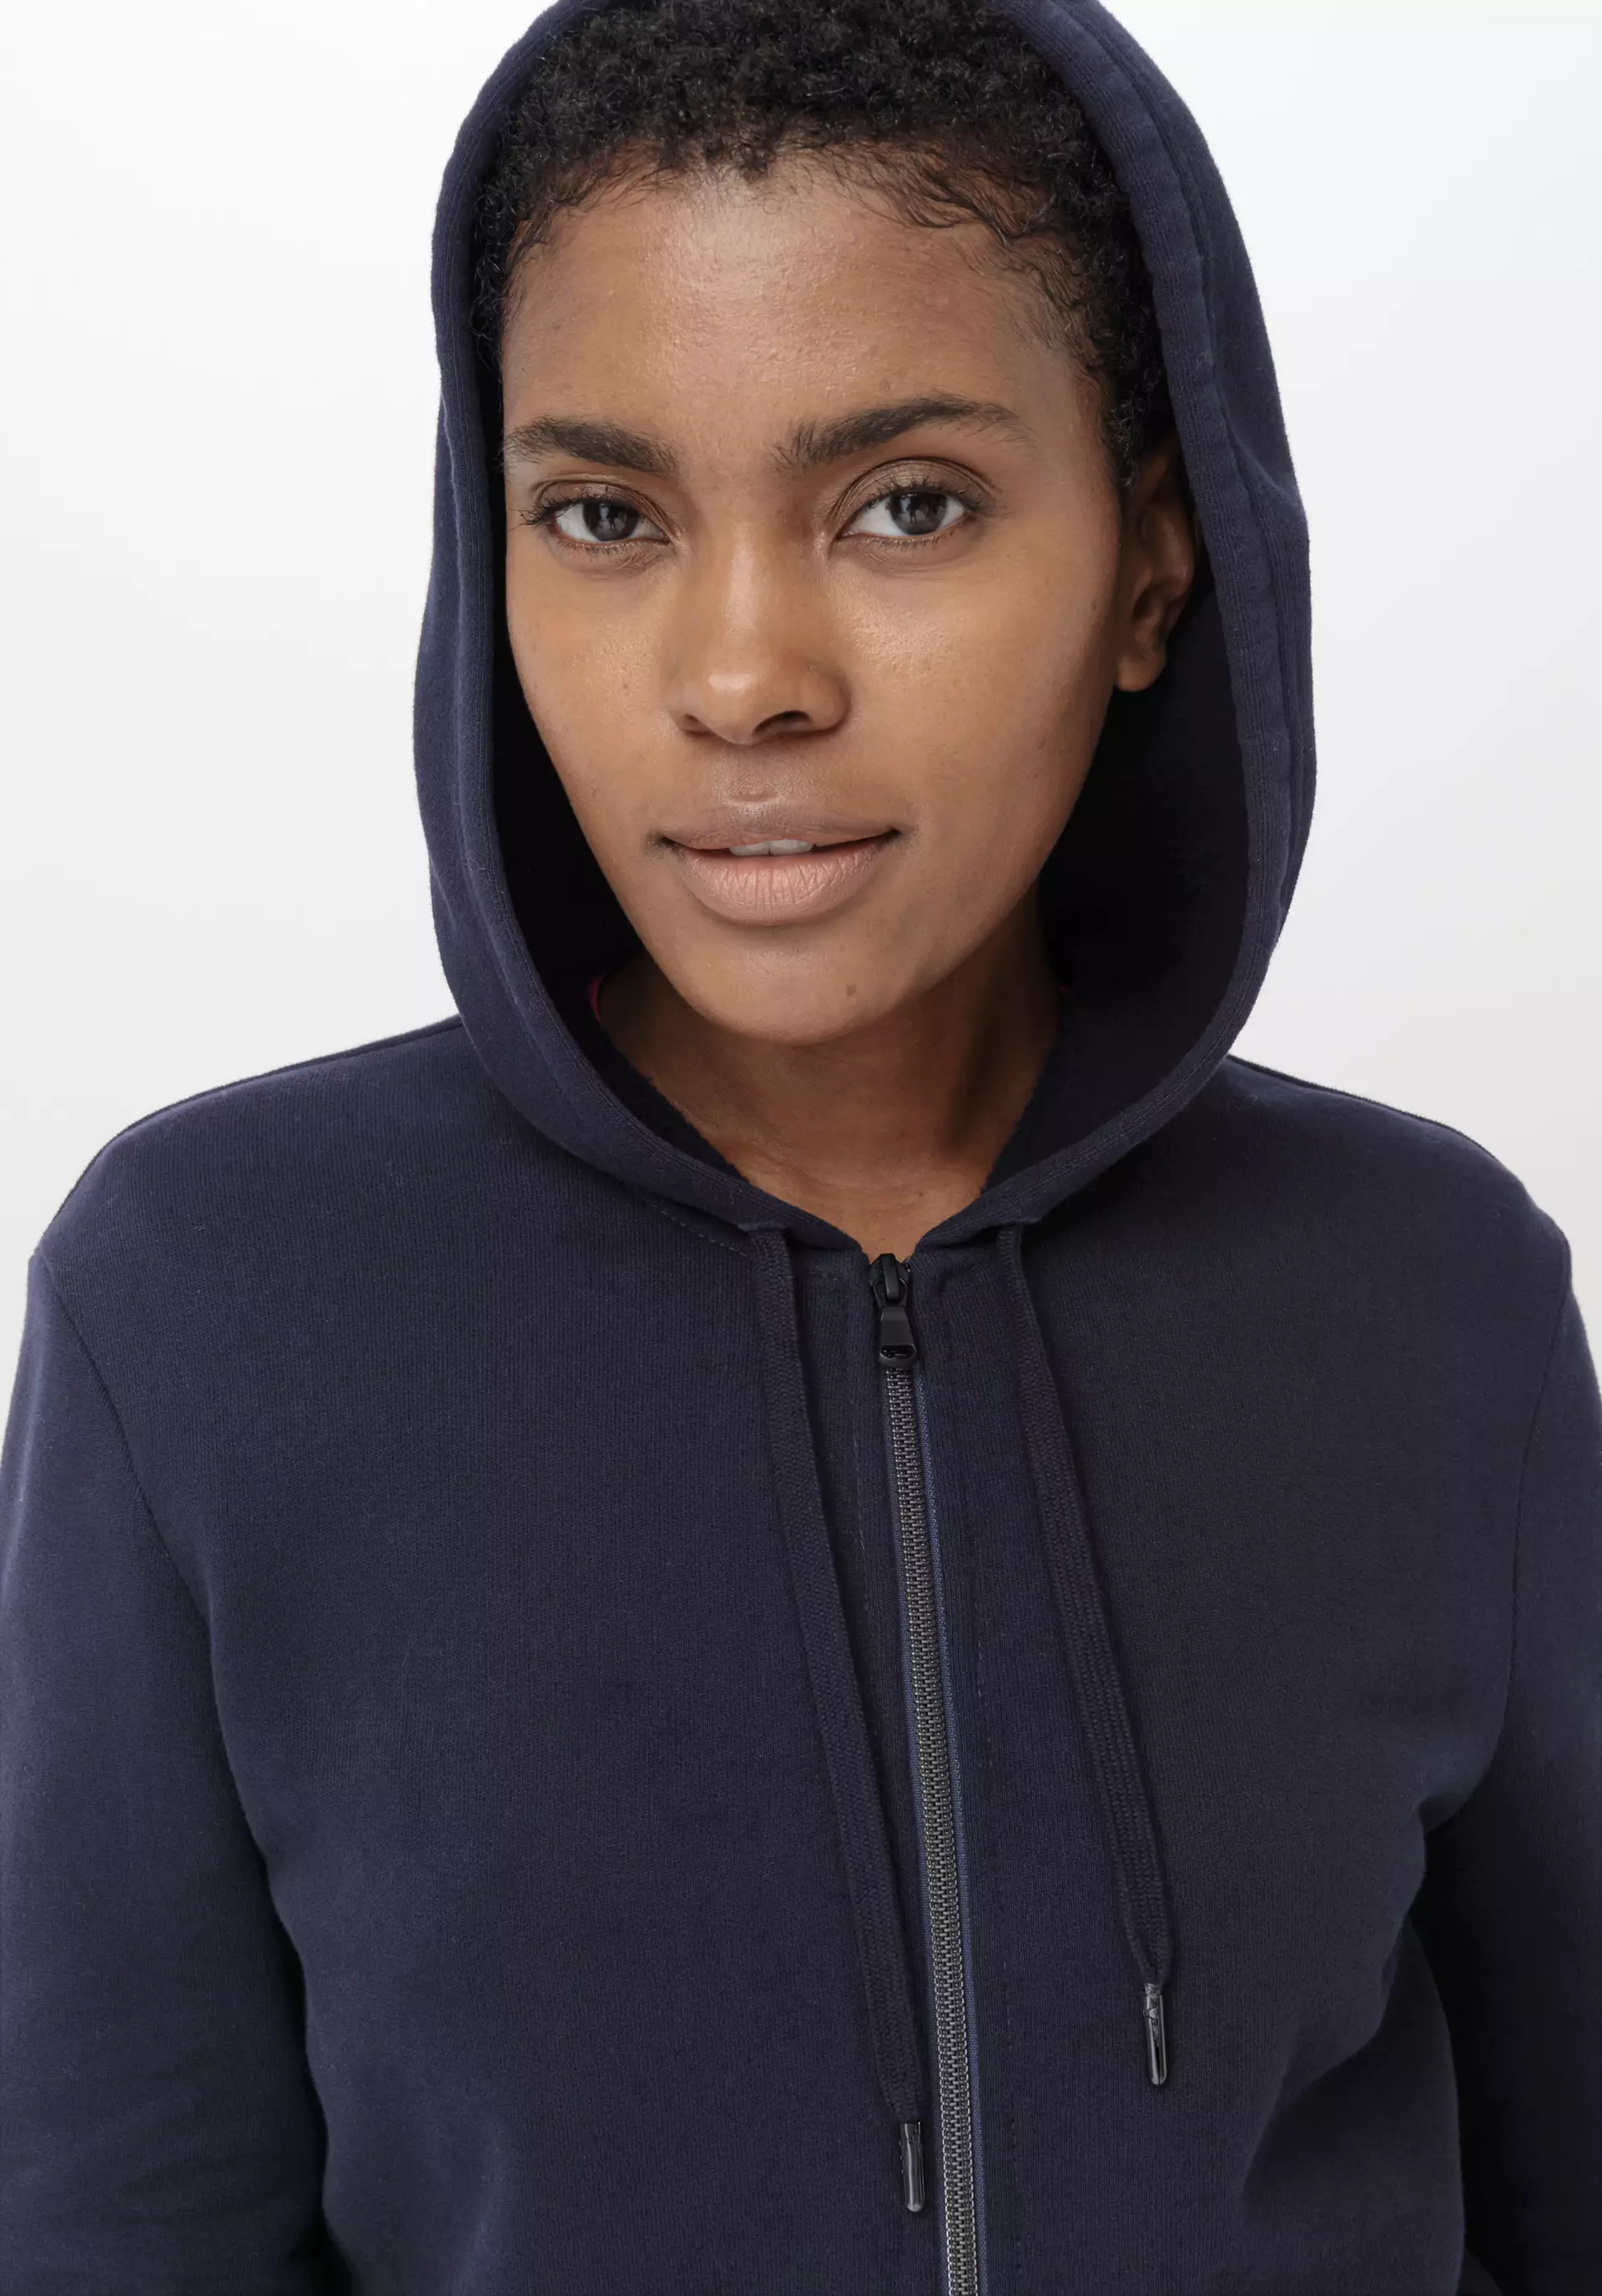 Sweat jacket made from pure organic cotton - 2